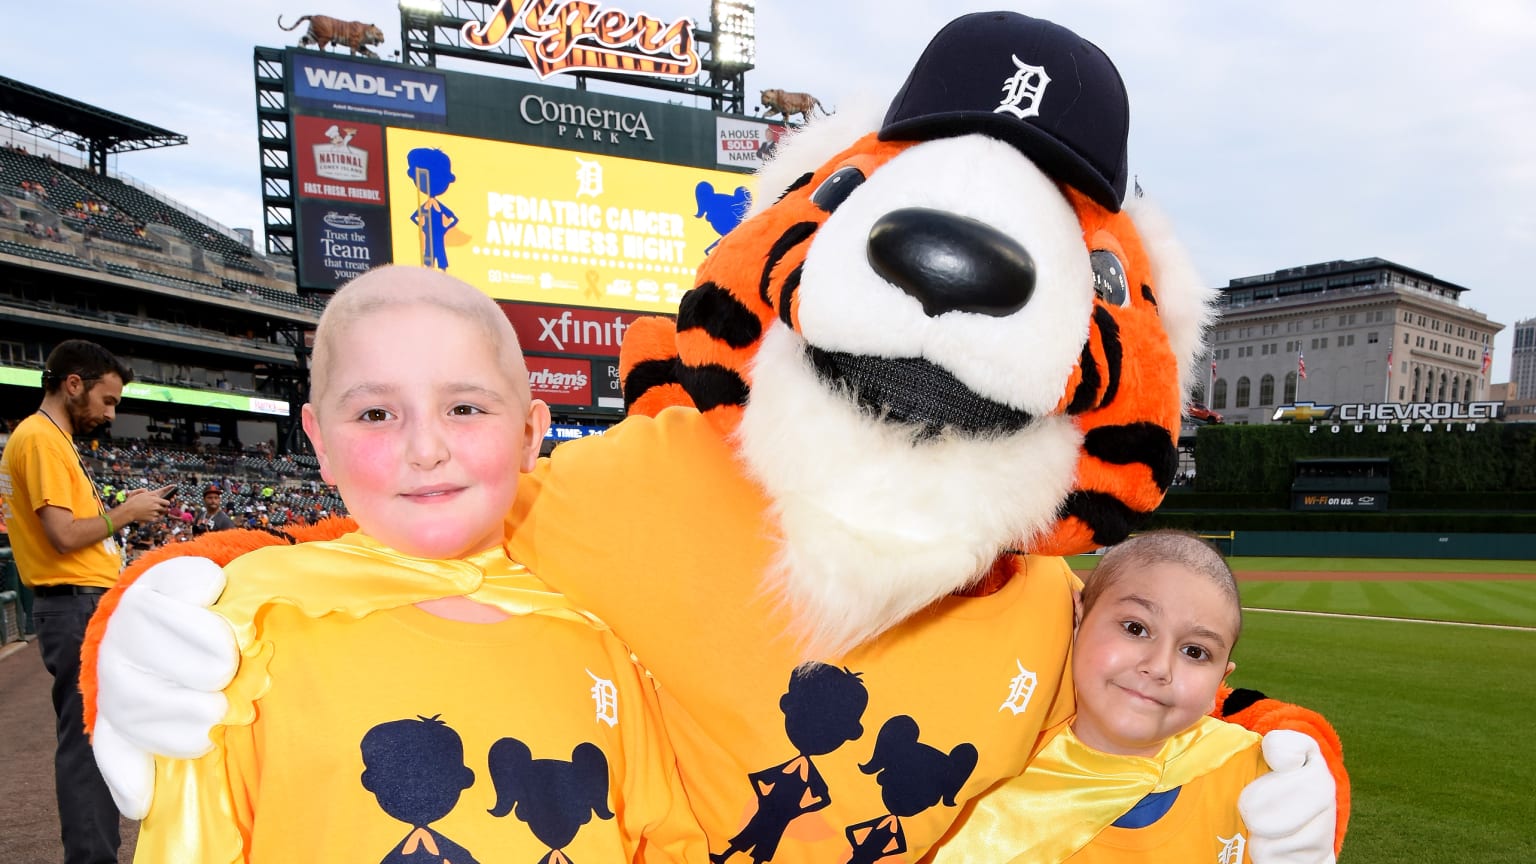 BCBSM and Detroit Tigers Celebrate Children's Health with Annual